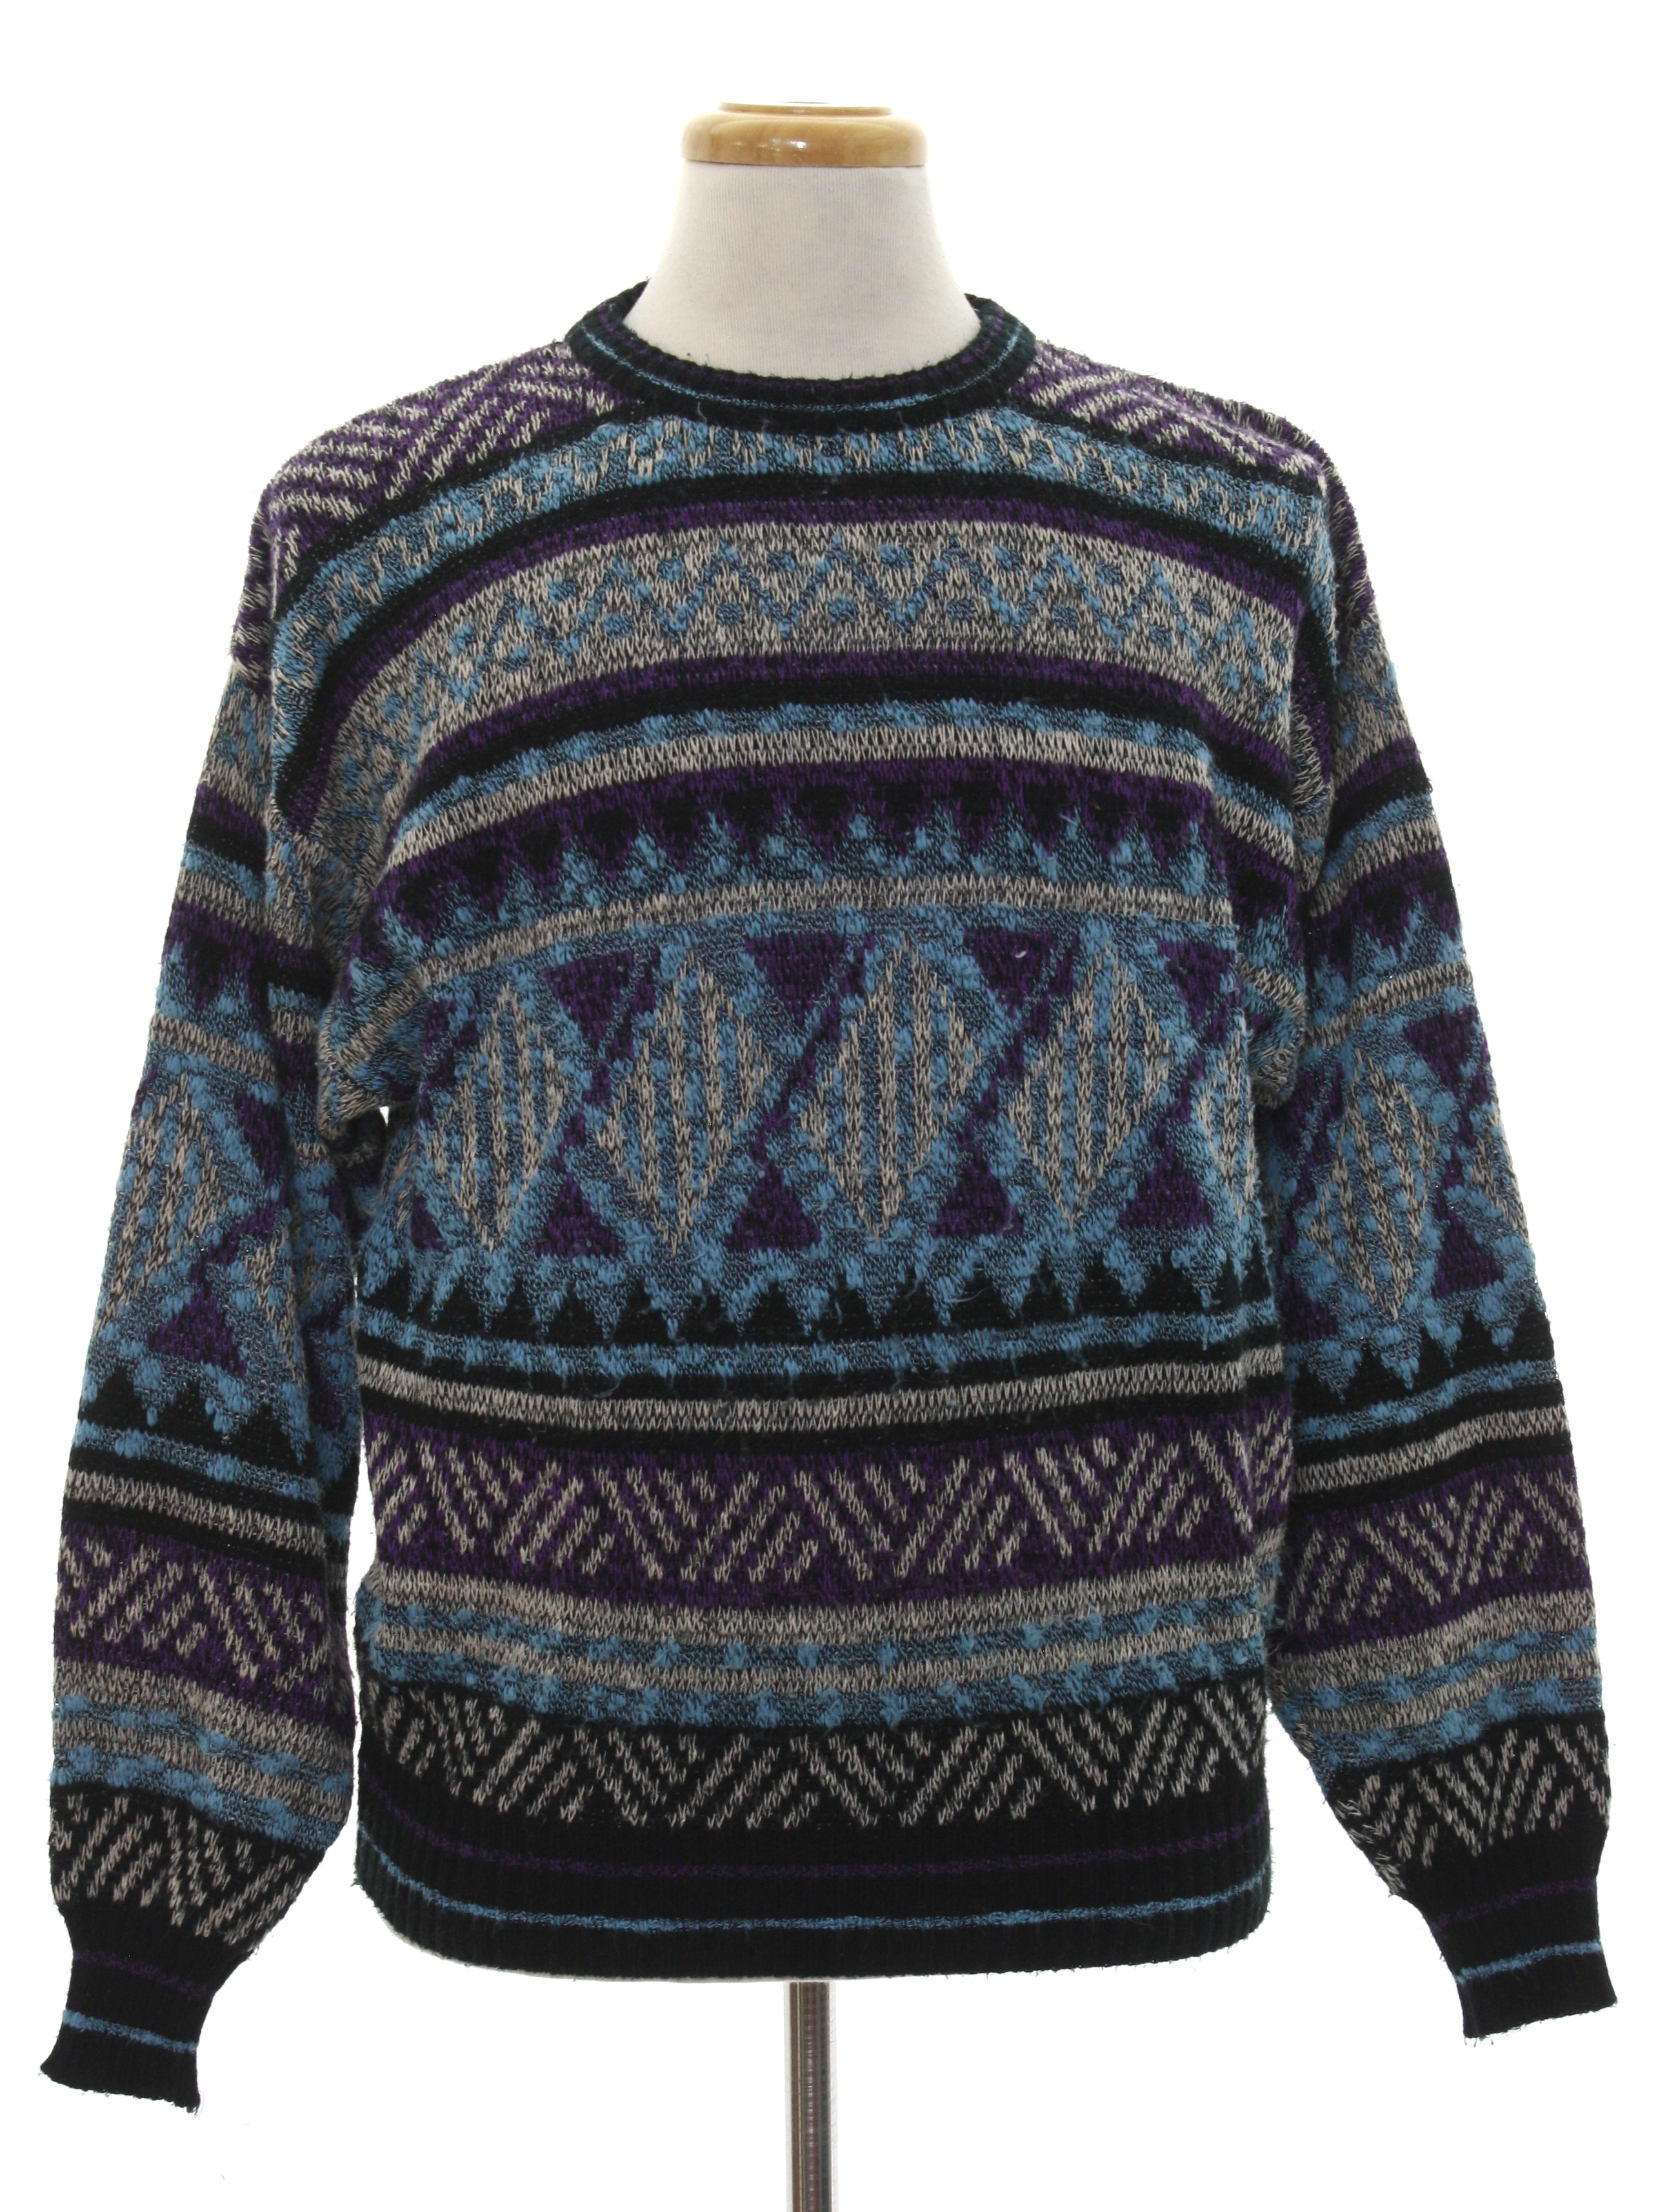 Eighties Expressions International Sweater: 80s -Expressions ...